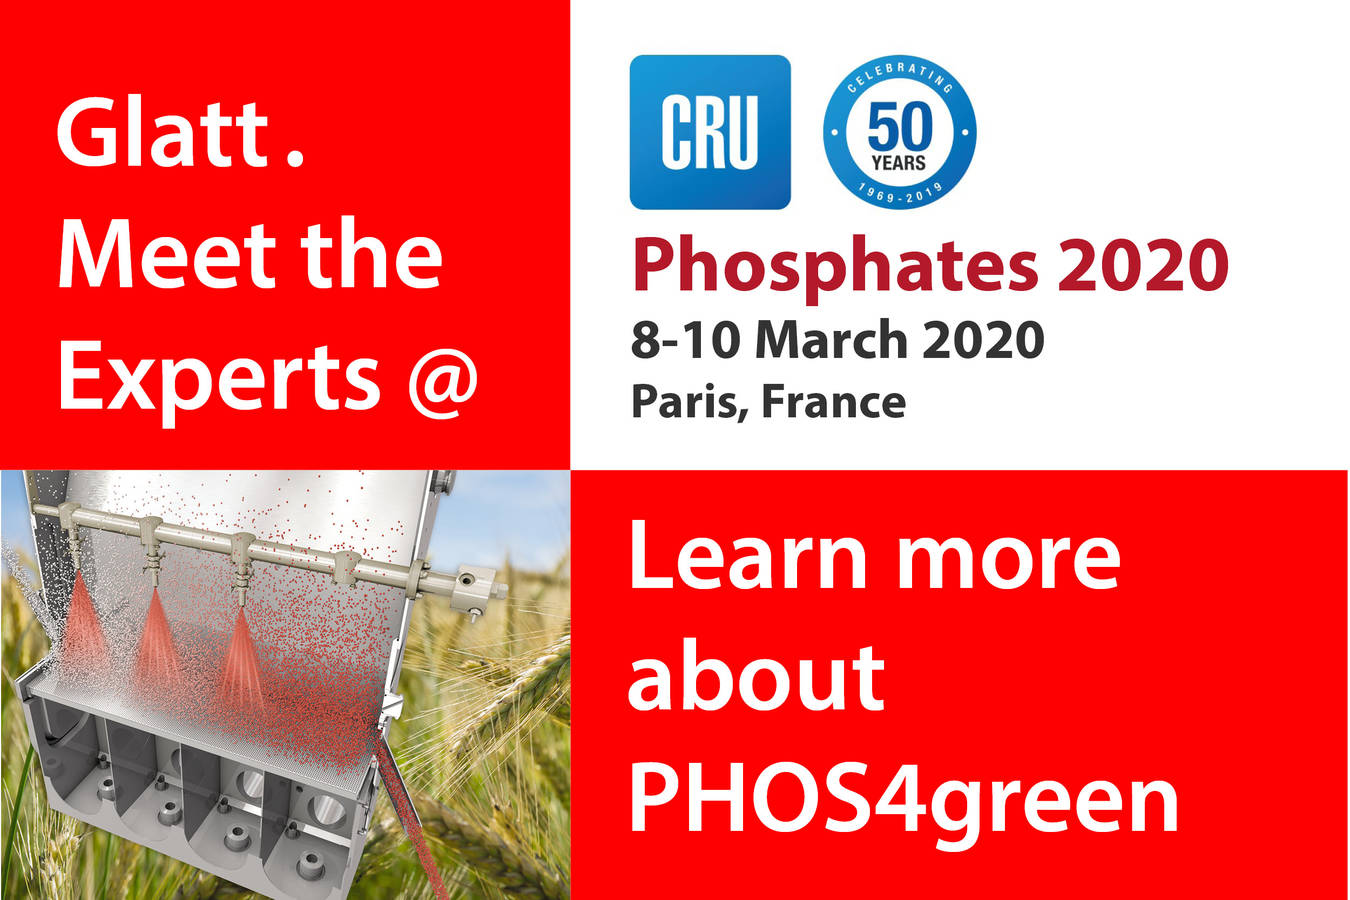 Meet the Glatt Experts @ CRU Phosphates 2020 Learn more about PHOS4green and phosphorus recovery by fluid bed technology